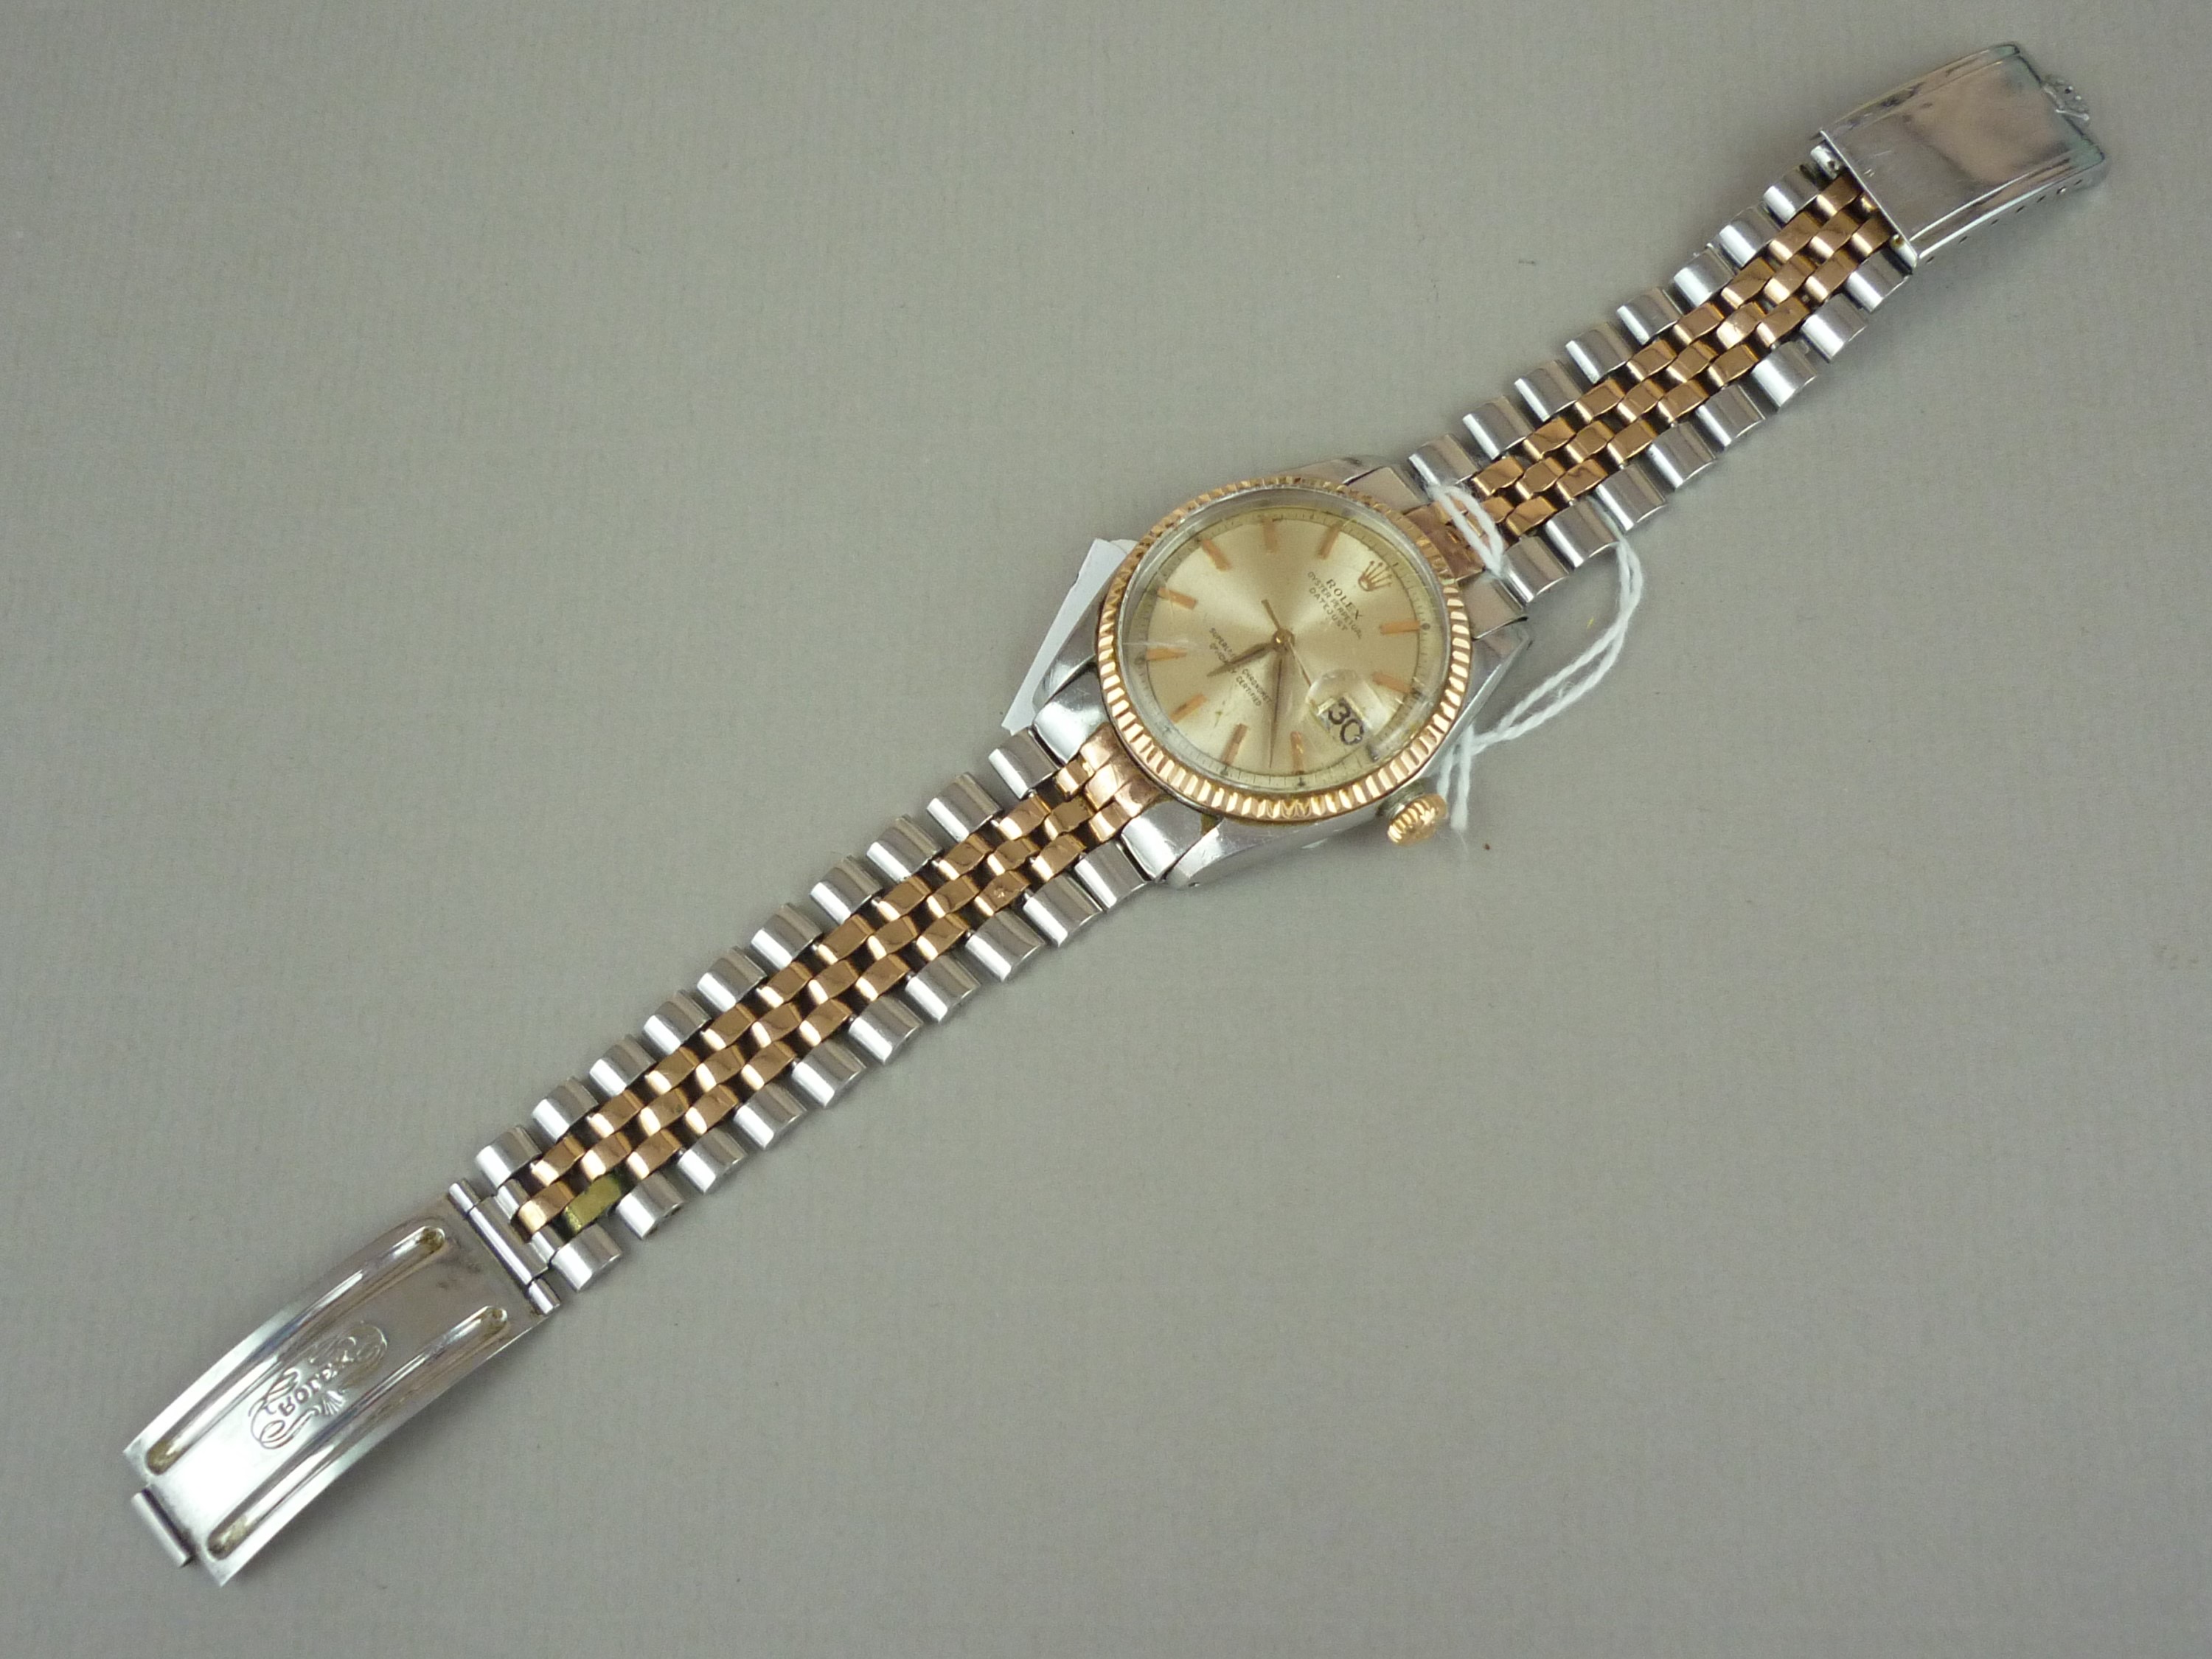 A Rolex bi-metallic Oyster Perpetual Datejust wrist watch, with Jubilee bracelet strap, 1958 or - Image 3 of 3